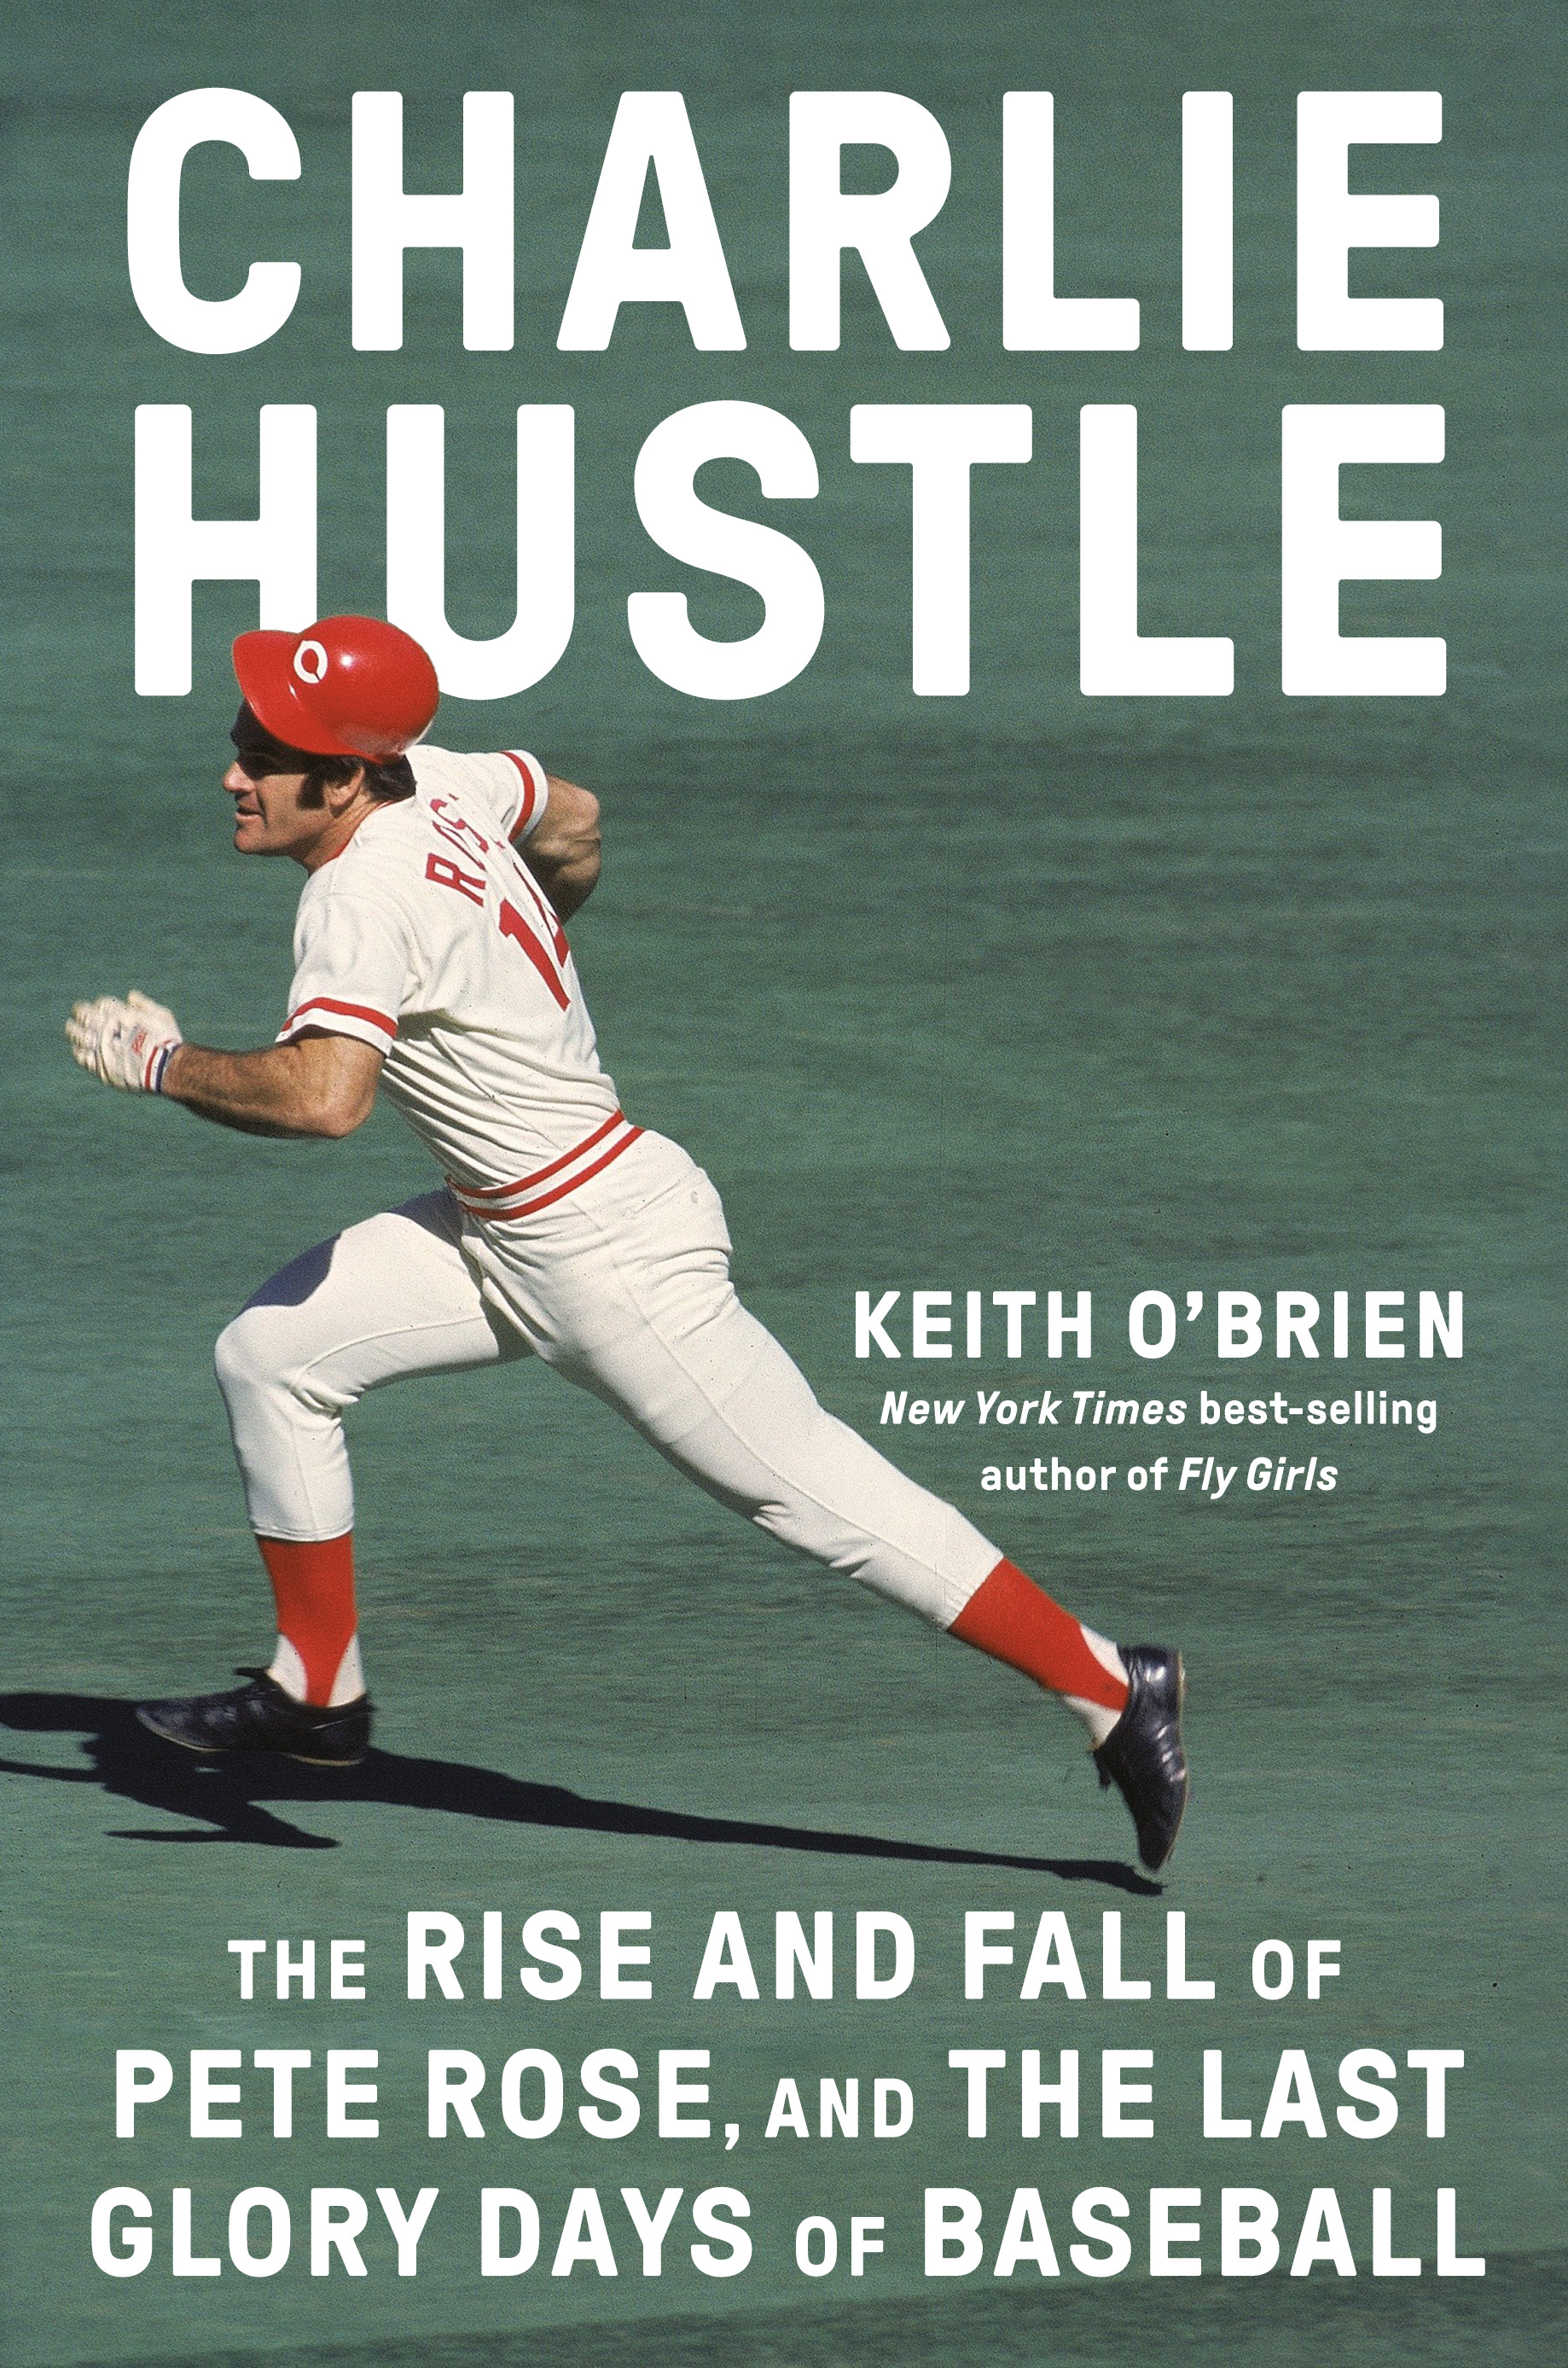 The cover of "Charlie Hustle: The Rise and Fall of Pete Rose, and the Last Glory Days of Baseball.”